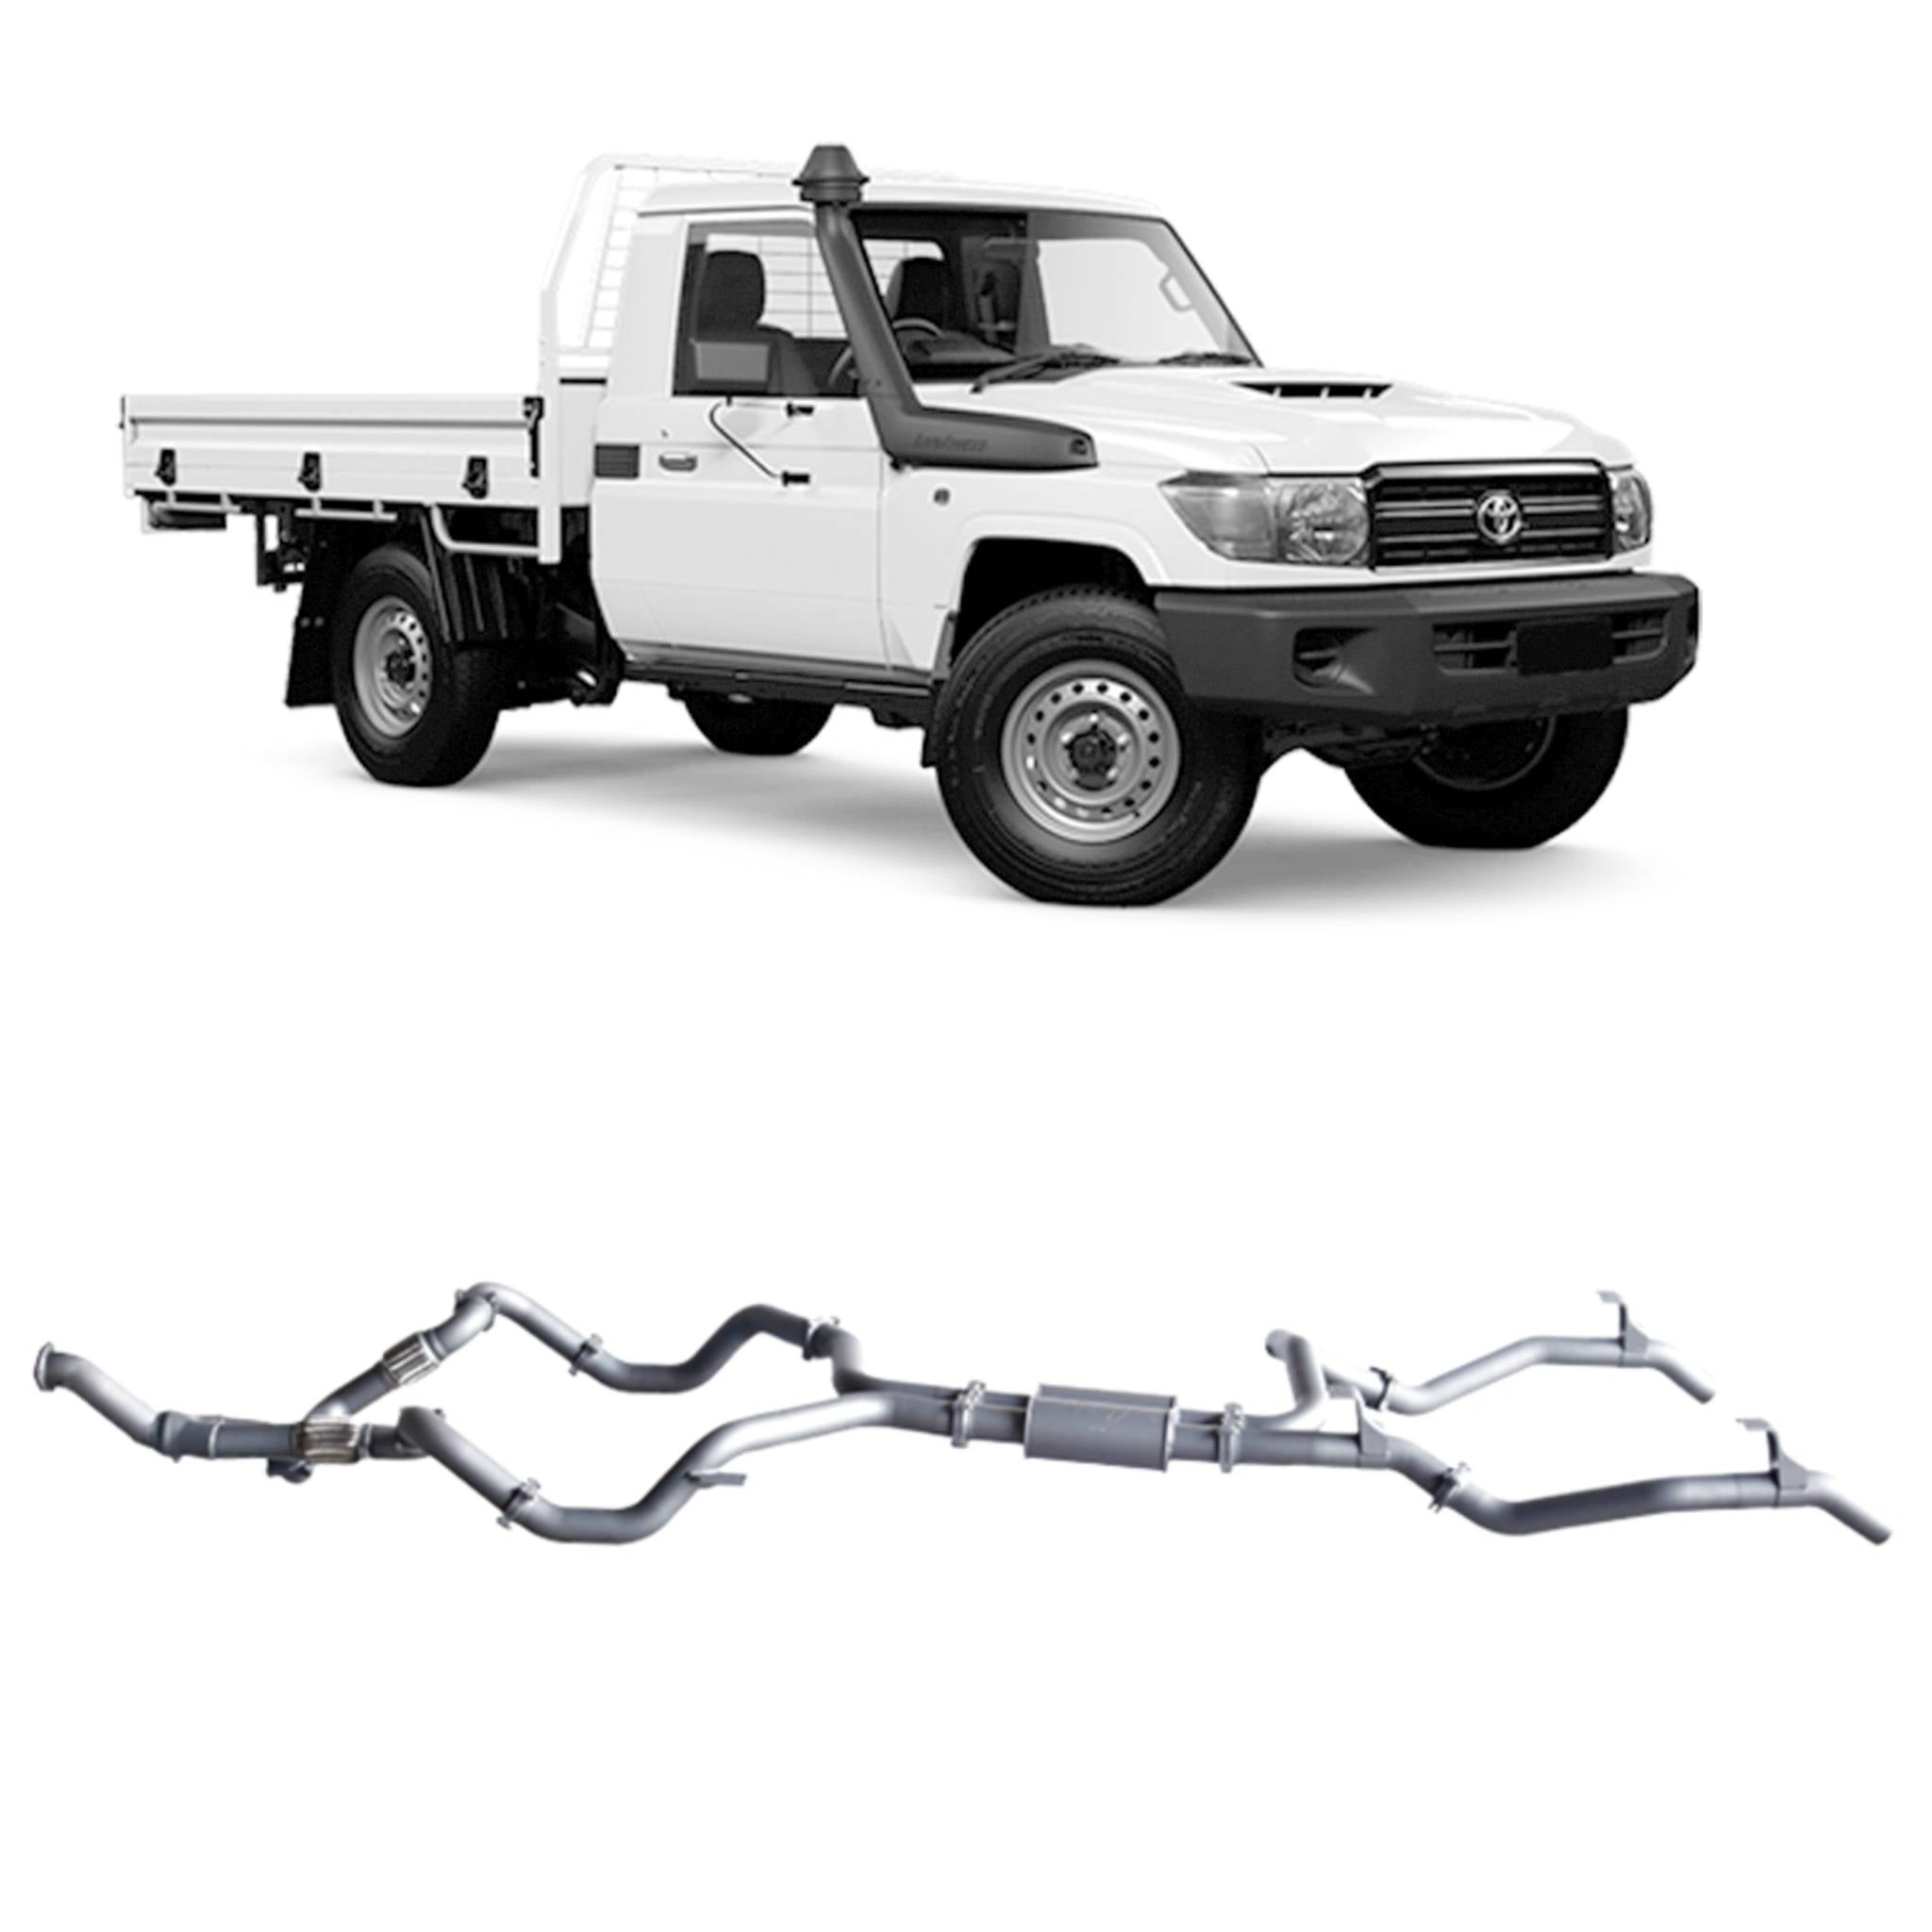 Redback 4x4 Extreme Duty Twin Exhaust to suit Toyota Landcruiser (01/2007 - 10/2016)